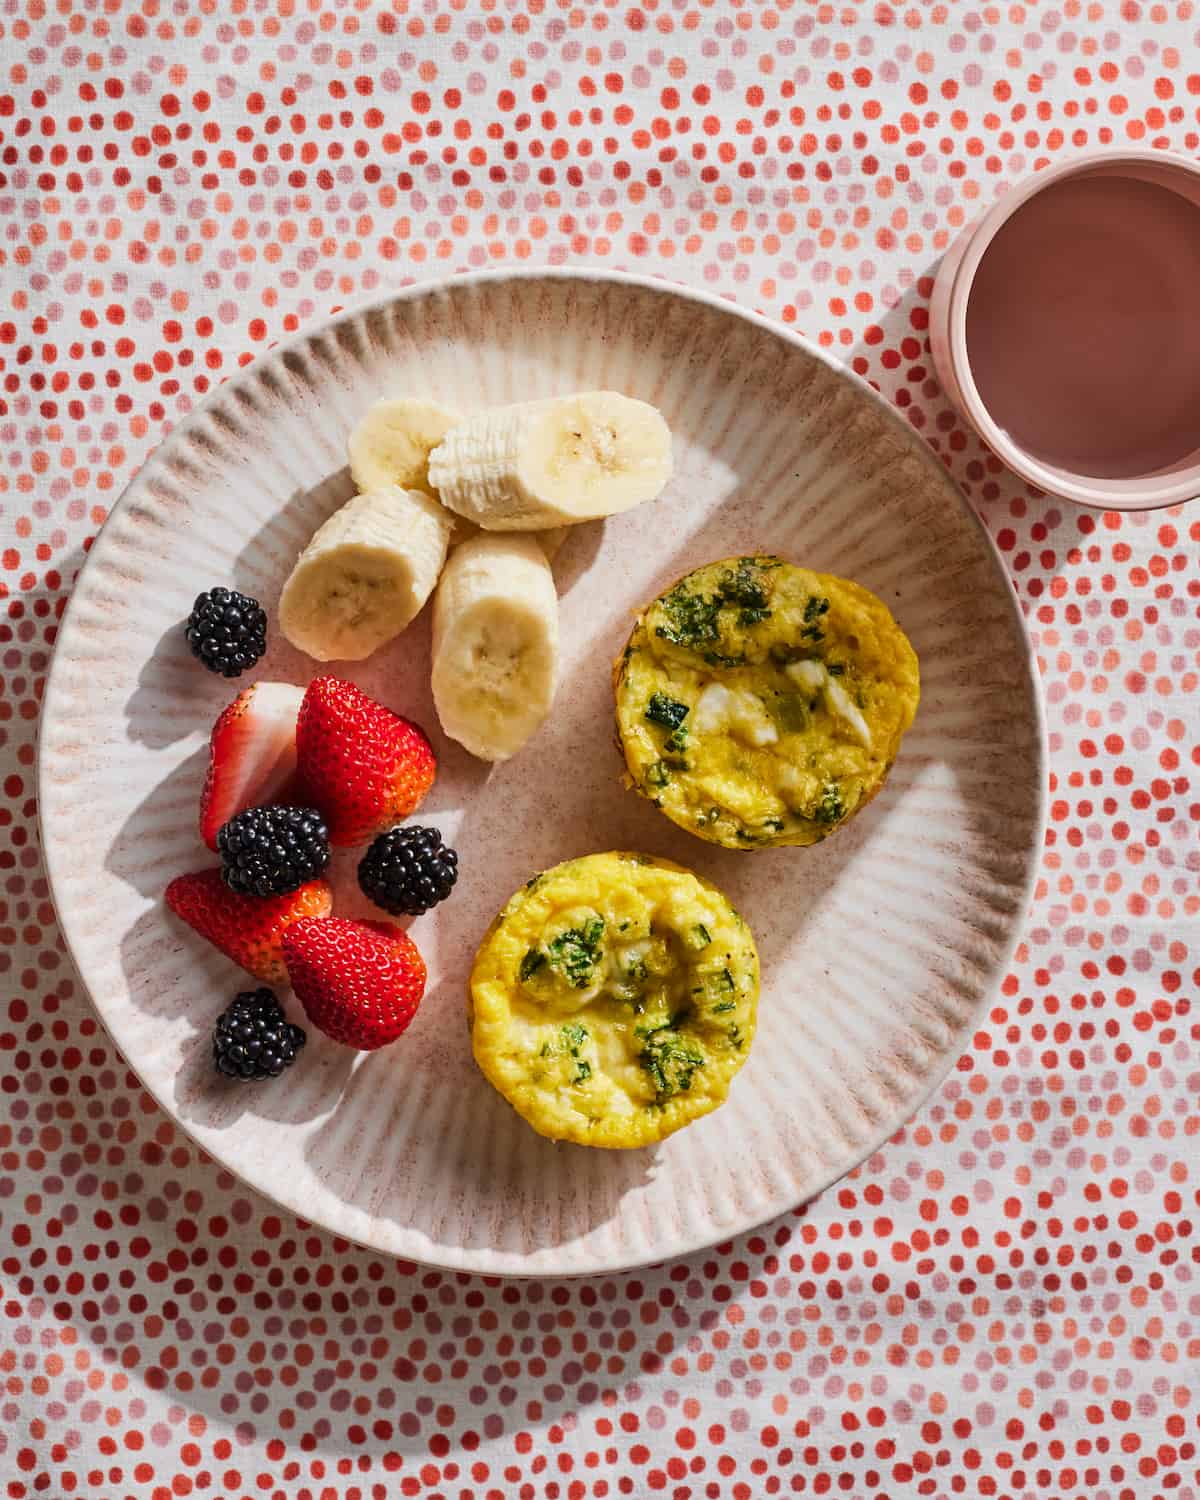 Two zucchini feta frittatas with a side of berries and sliced bananas on a ceramic plate and a cup of water in the top right corner